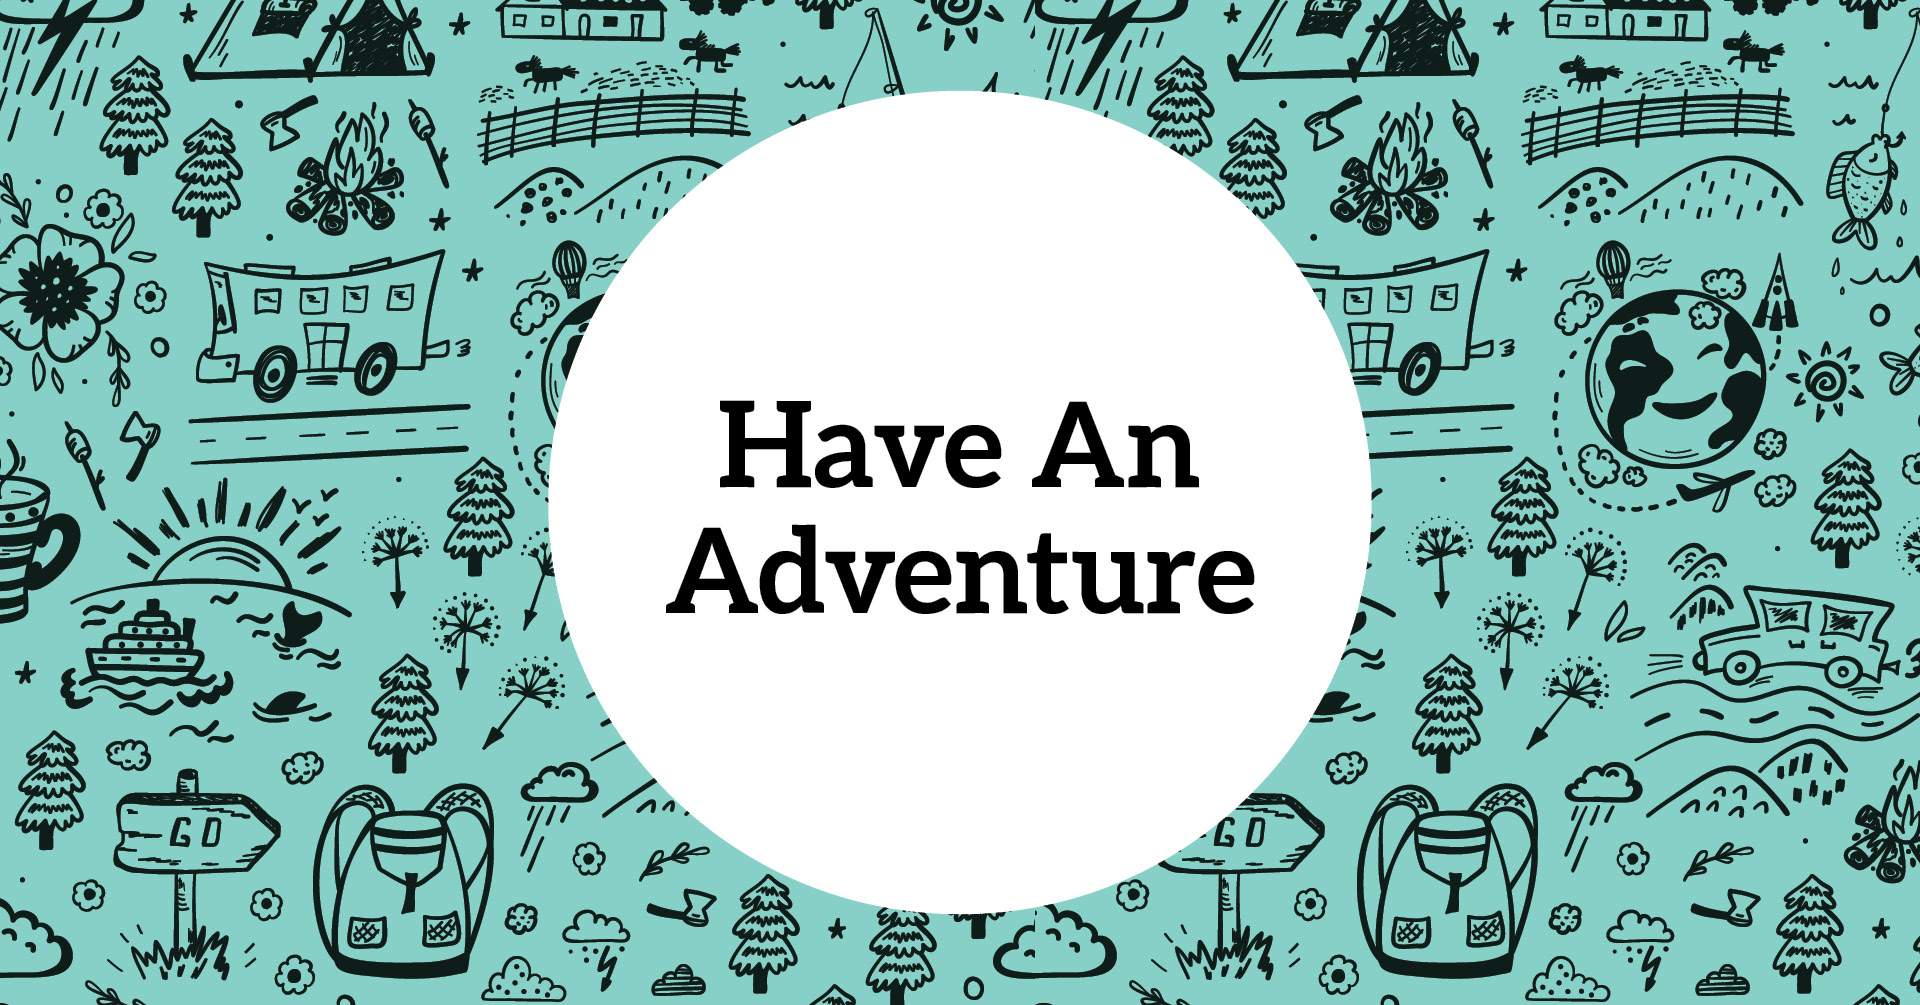 Have an Adventure